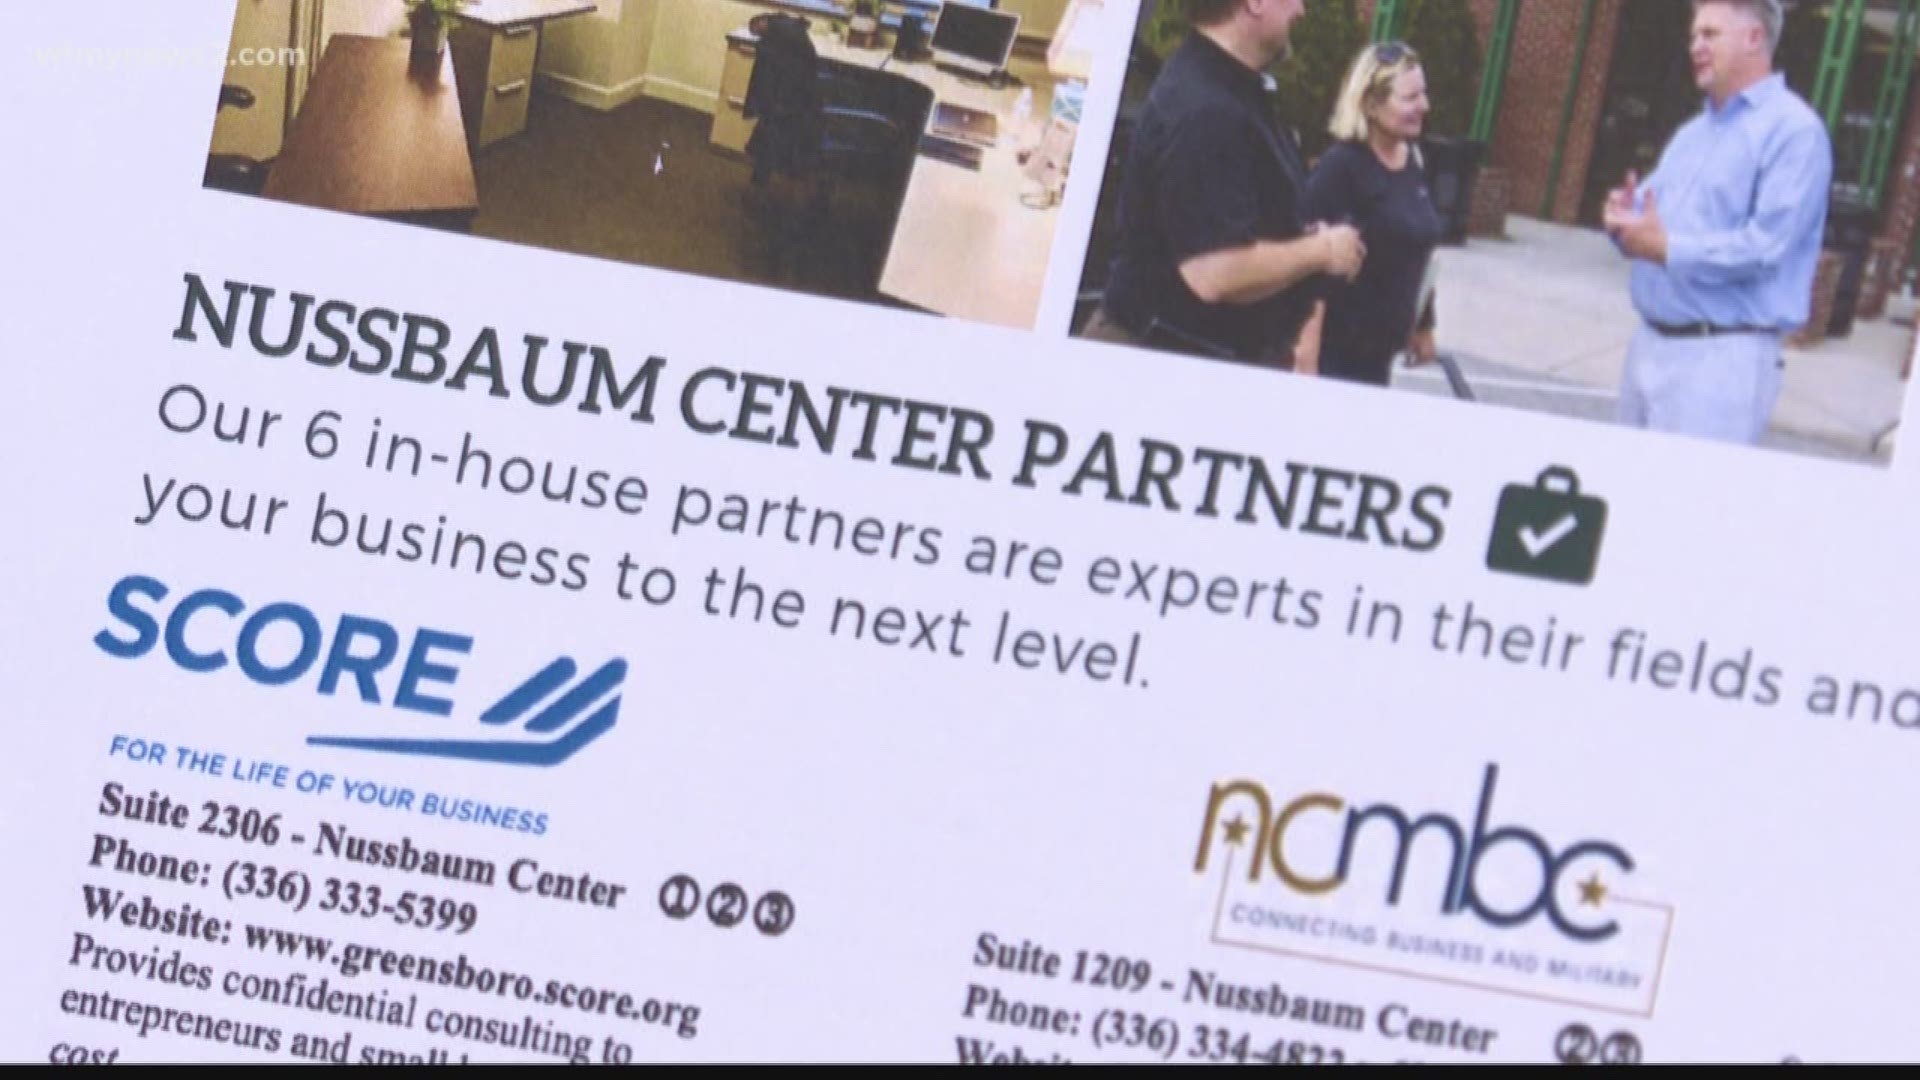 The Nussbaum Center is a Greensboro nonprofit organization offering advice for entrepreneurs.